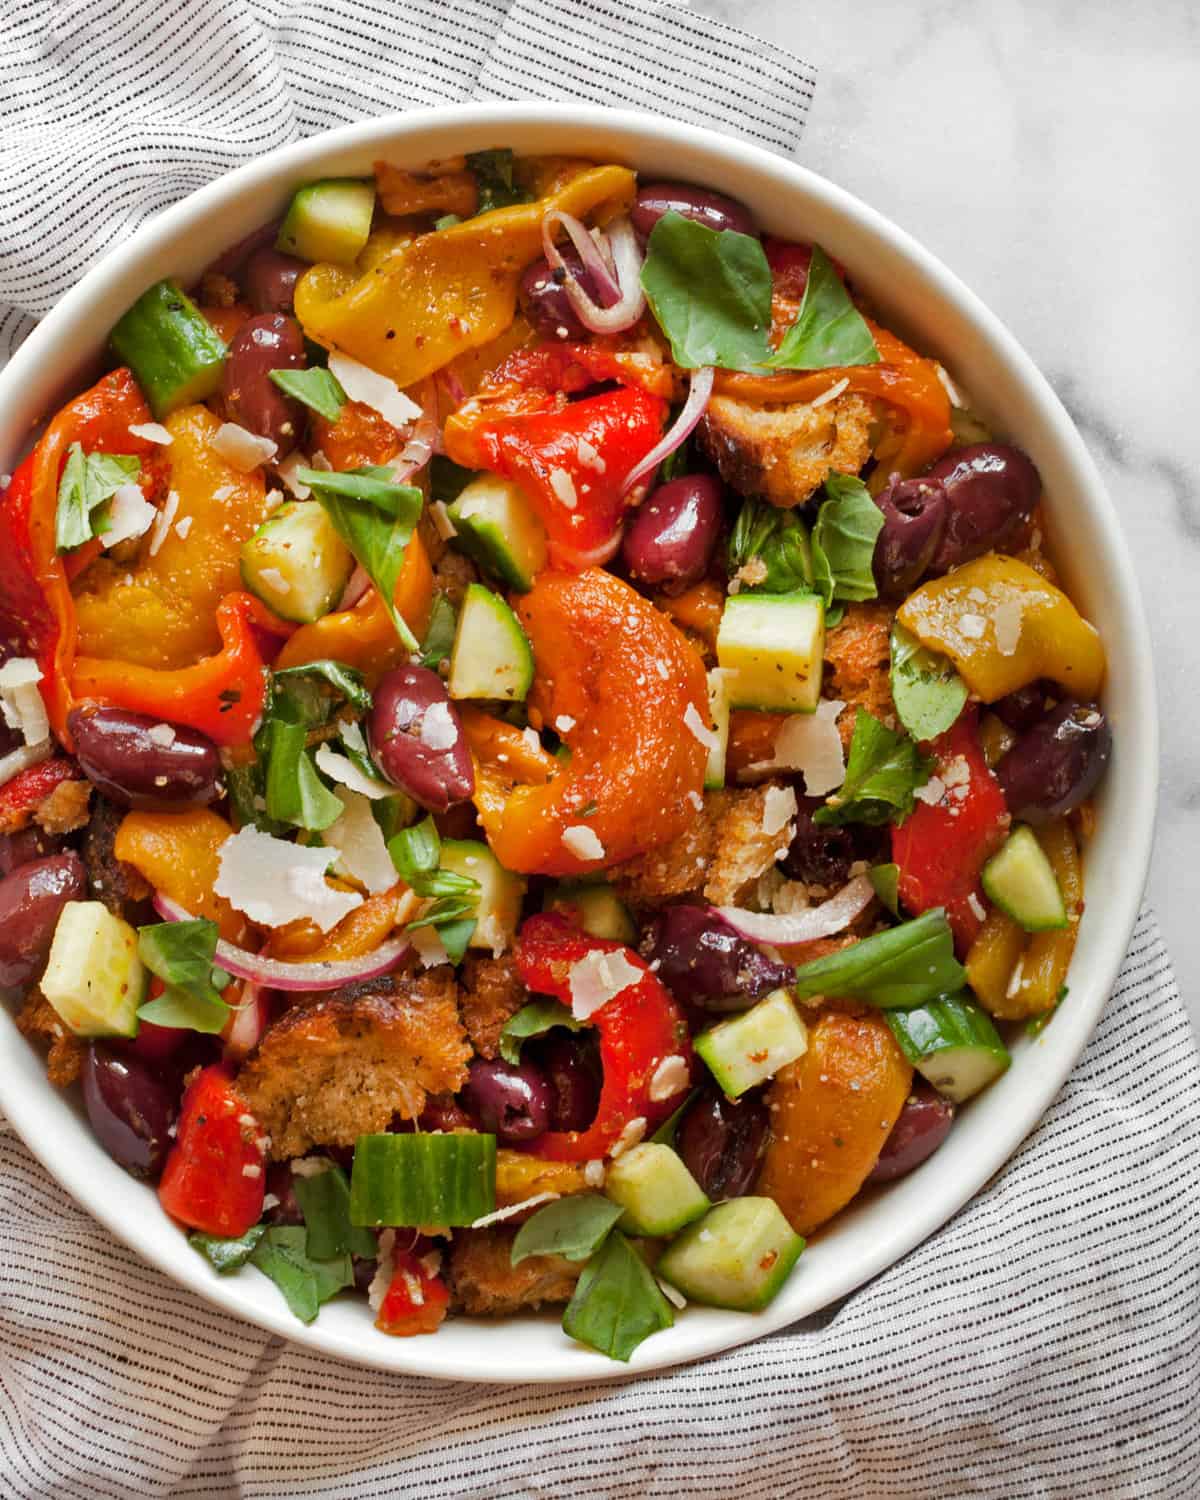 Salad with roasted peppers, cucumbers and olives in a bowl